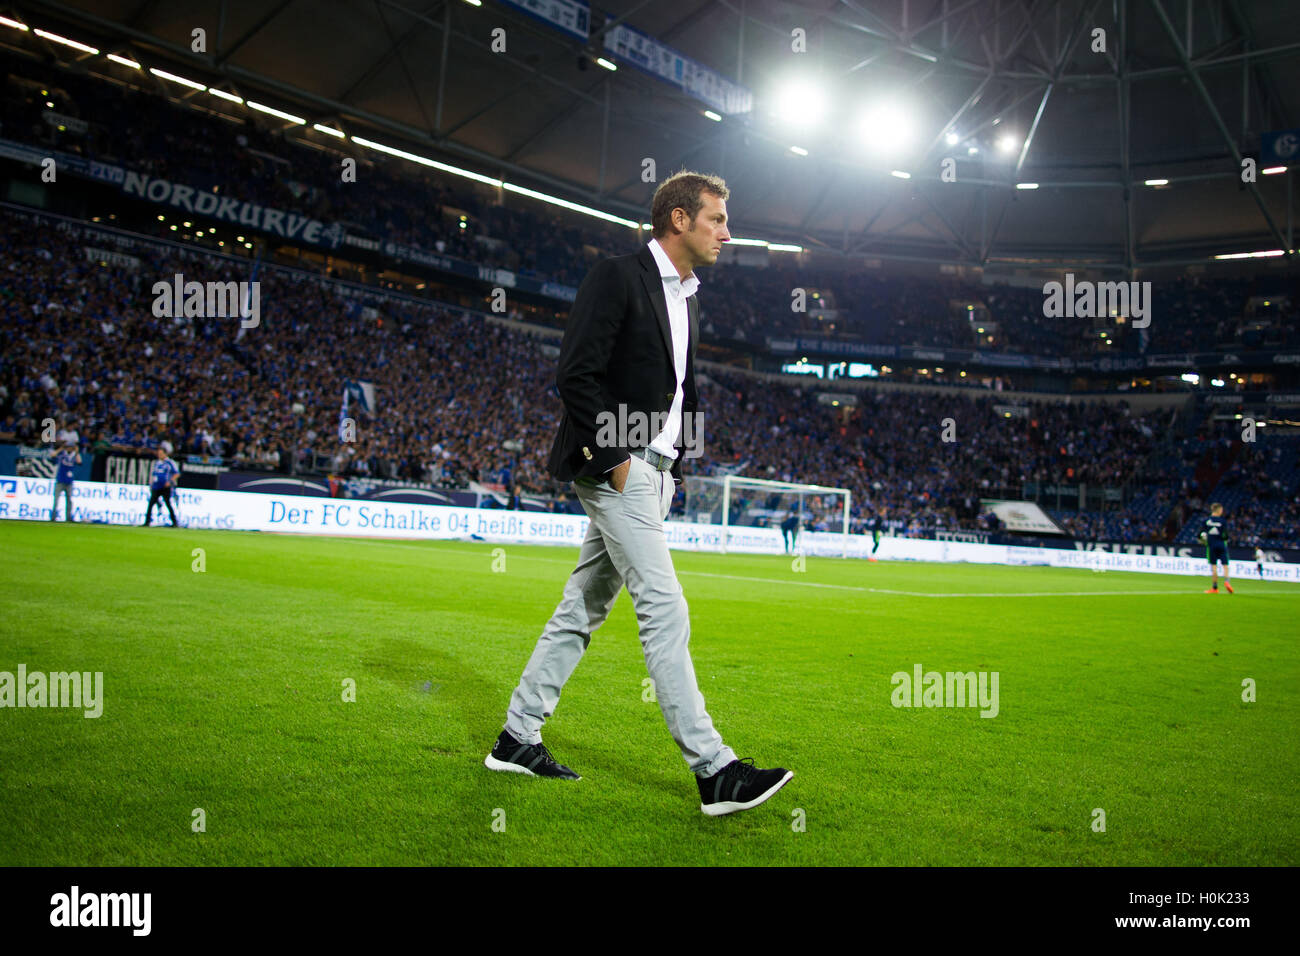 Gelsenkirchen, Germany. 21st Sep, 2016. Coach of Schalke Markus Weinzierl before the match of FC Schalke o4 against 1. FC Cologne on the fourth match day of the Bundesliga at the Veltins Arena in Gelsenkirchen, Germany, 21 September 2016. PHOTO: ROLF VENNENBERND/dpa (EMBARGO CONDITIONS - ATTENTION: Due to the accreditation guidelines, the DFL only permits the publication and utilisation of up to 15 pictures per match on the internet and in online media during the match.) © dpa/Alamy Live News Stock Photo